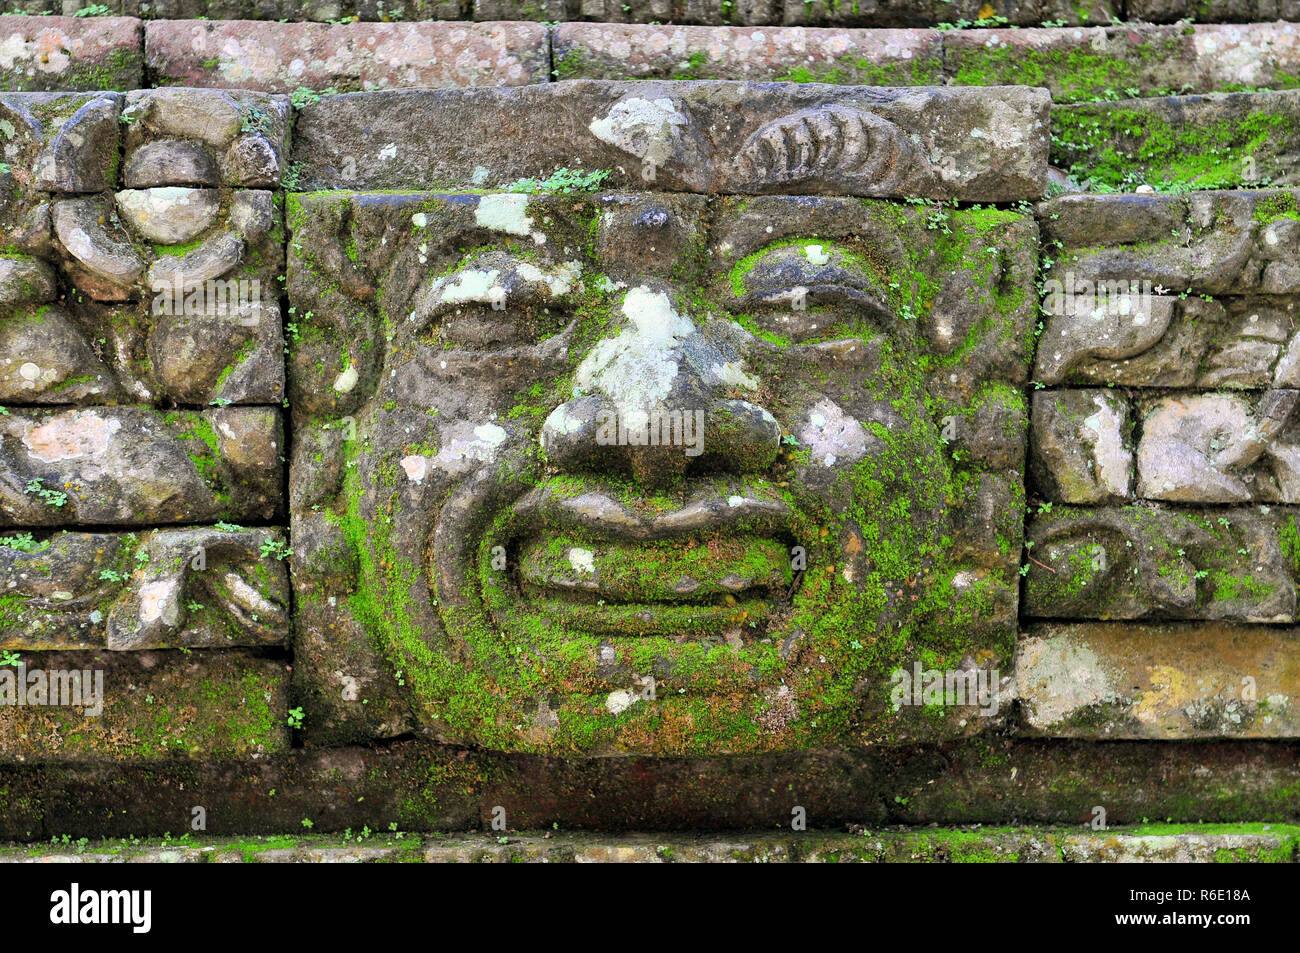 Carvings Depicting Demons, Gods And Balinese Mythological Deities Can Be Found Throughout The Pura Dalem Agung Padangtegal Temple In The Monkey Forest Stock Photo